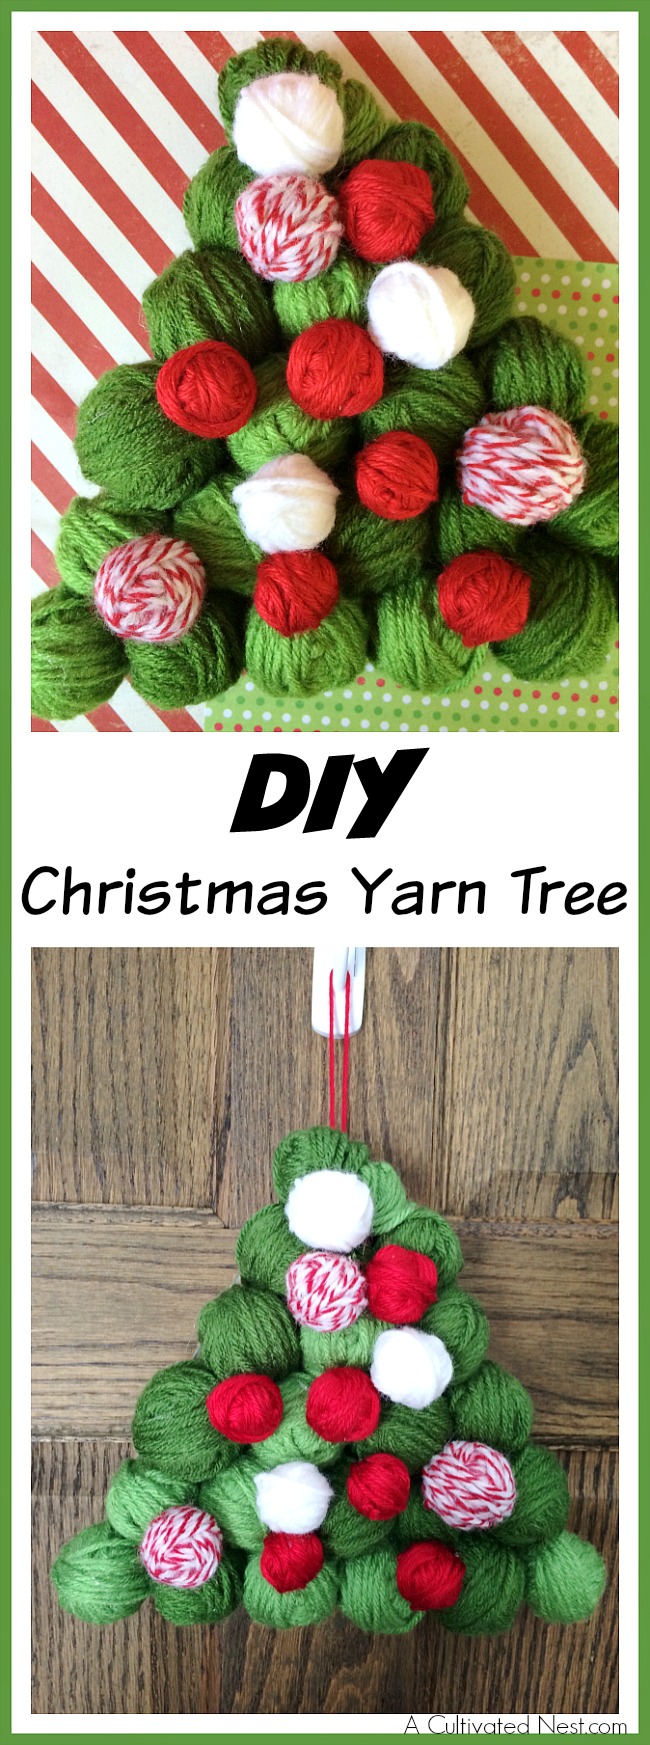 Want to decorate your home with more Christmas tree shaped decorations? Then you've got to make this adorable DIY Christmas yarn tree!